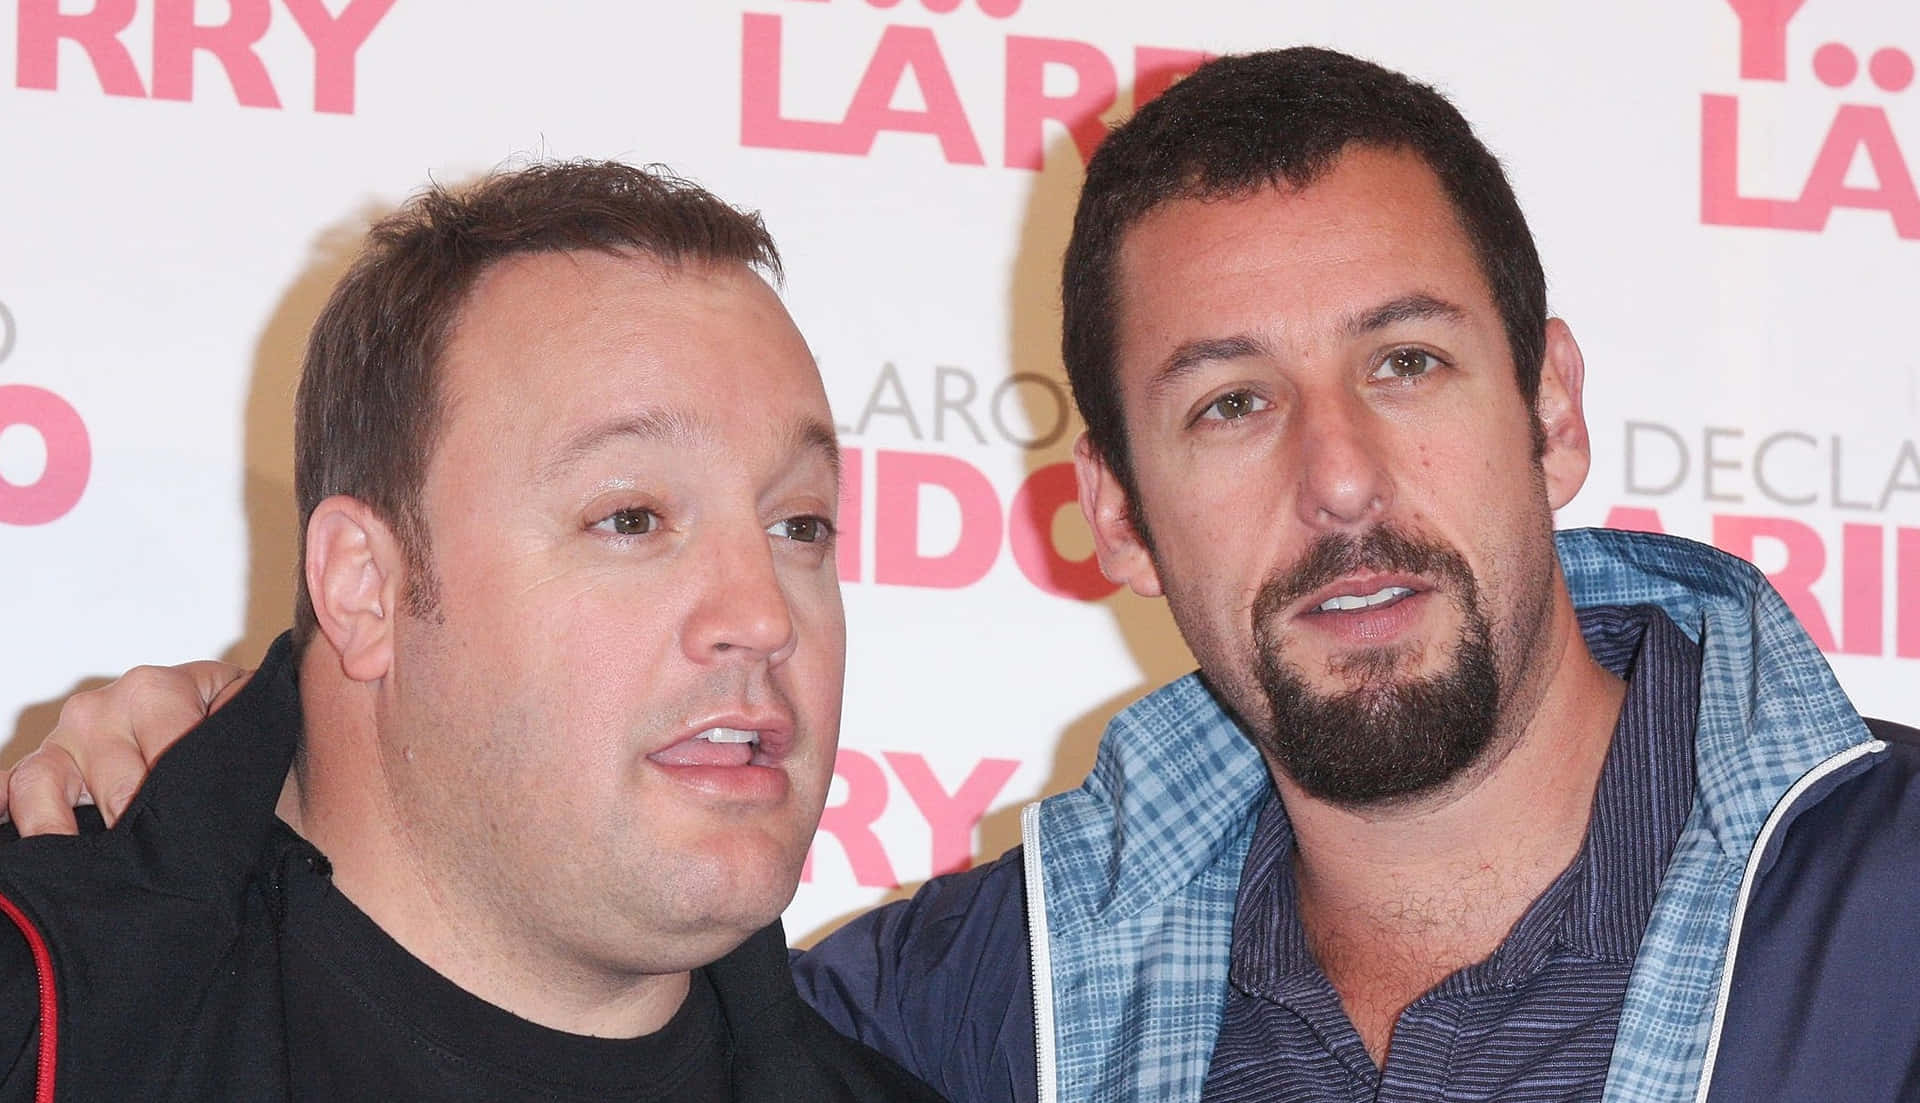 Adam Sandler proves he is now and forever a comedic genius